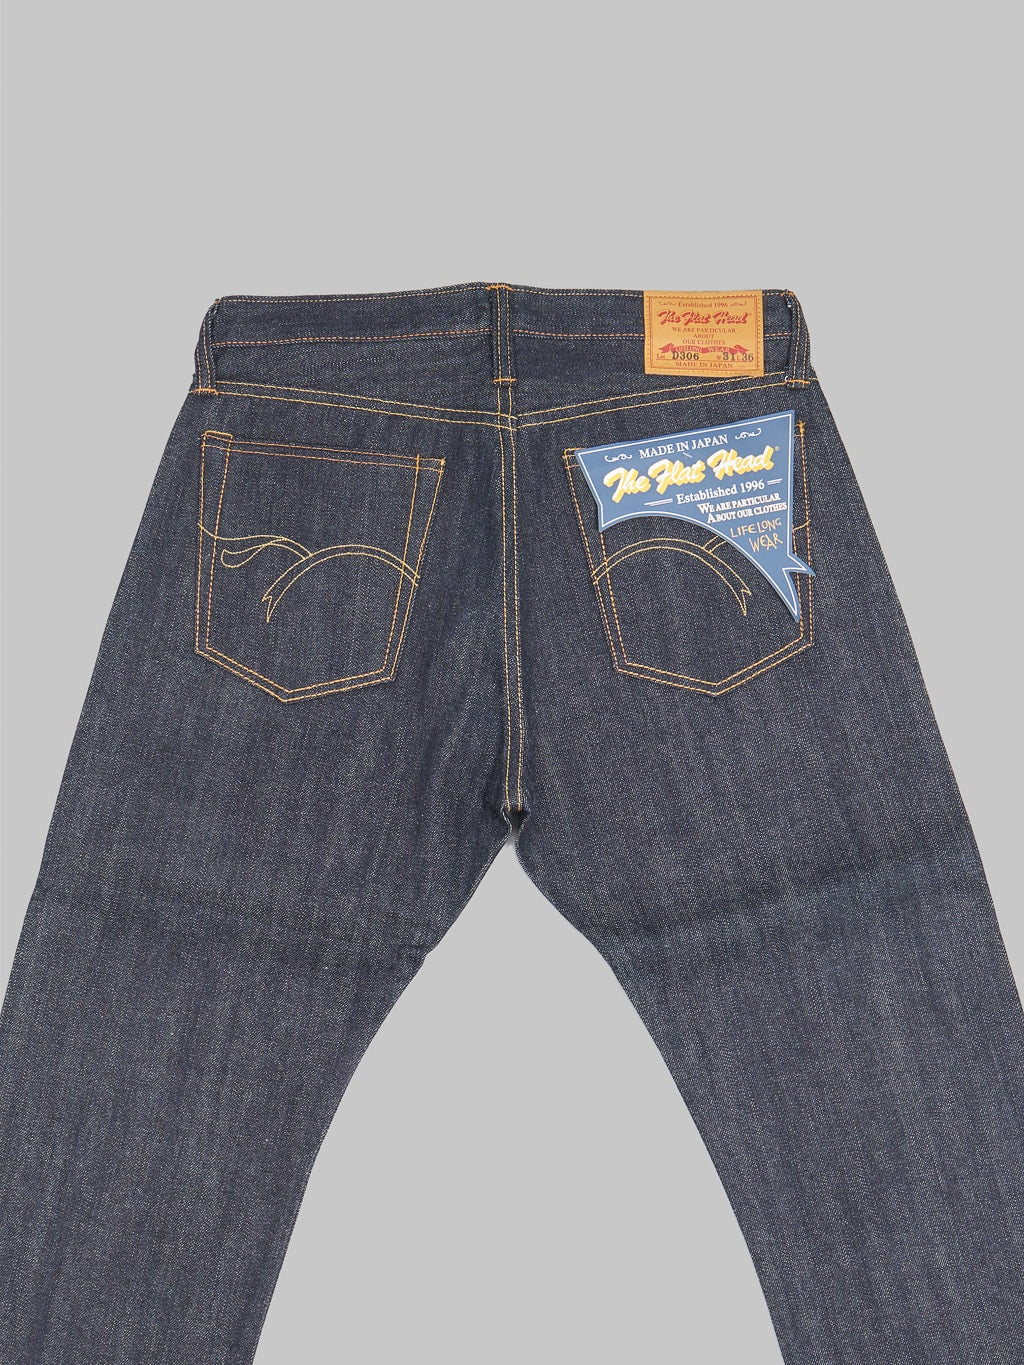 The Flat Head D306 Tight Tapered Jeans  back pockets